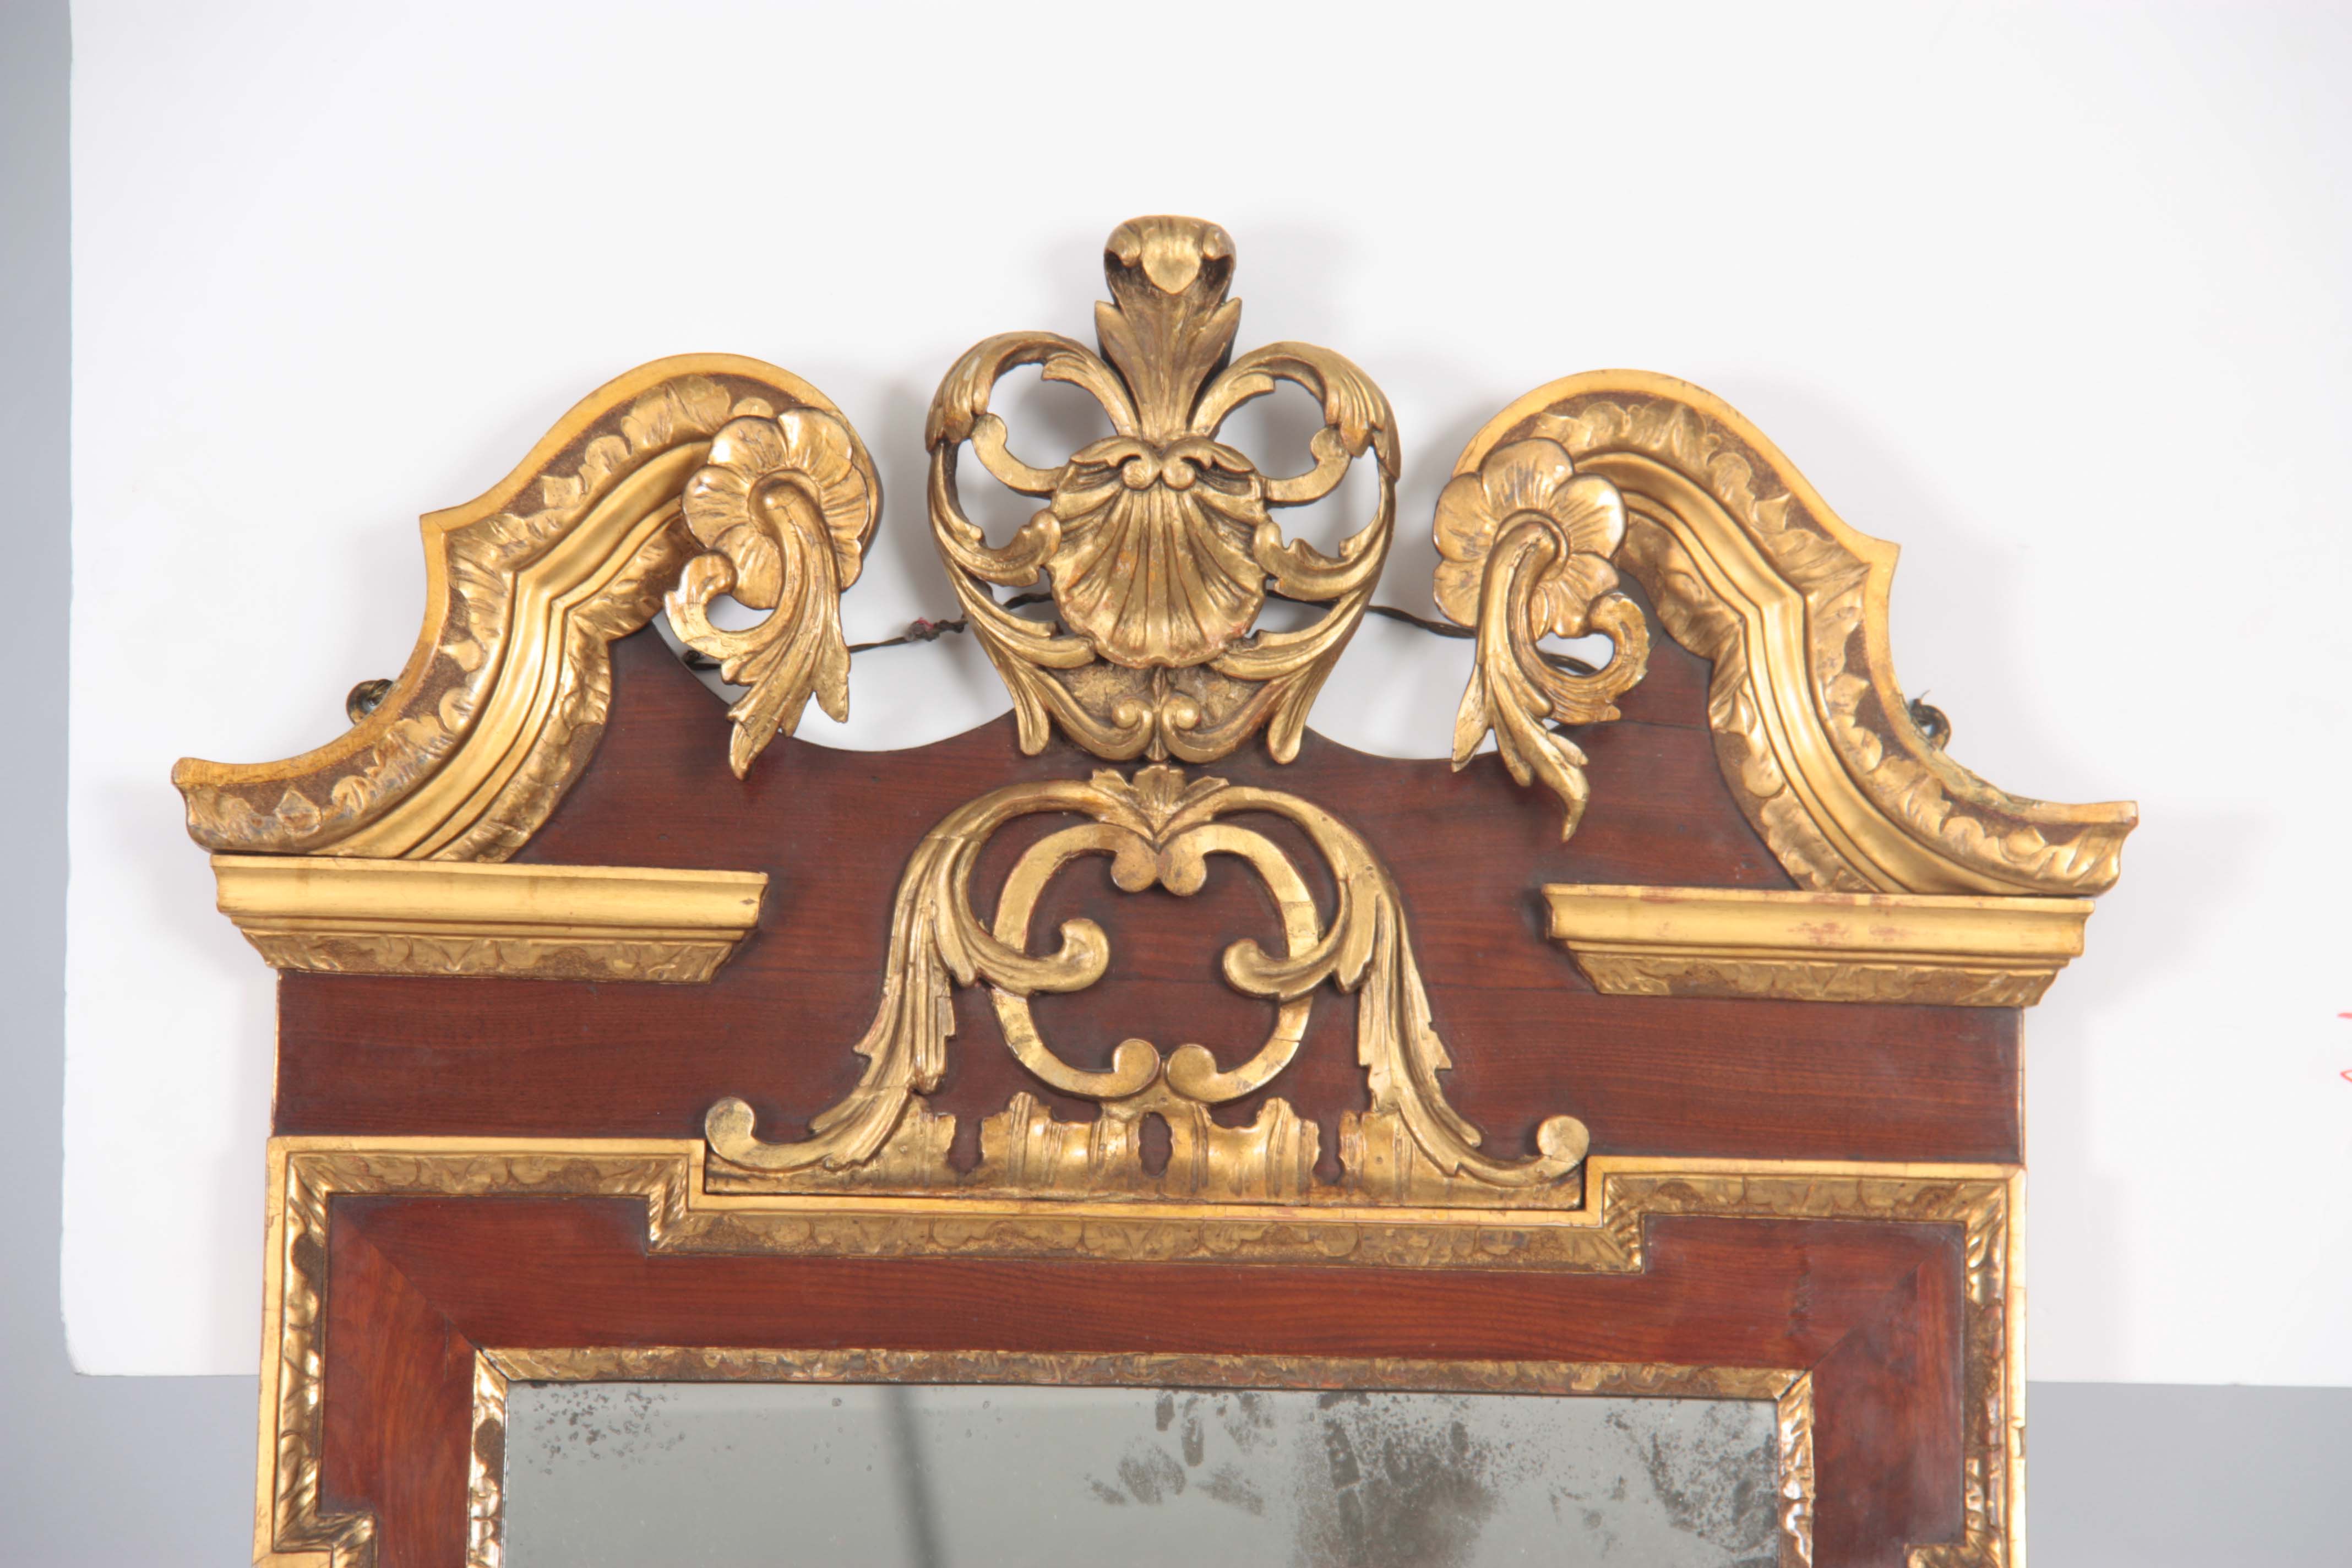 AN 18TH CENTURY MAHOGANY AND PARCEL GILT HANGING MIRROR with elaborate swan neck and shellwork - Image 3 of 5